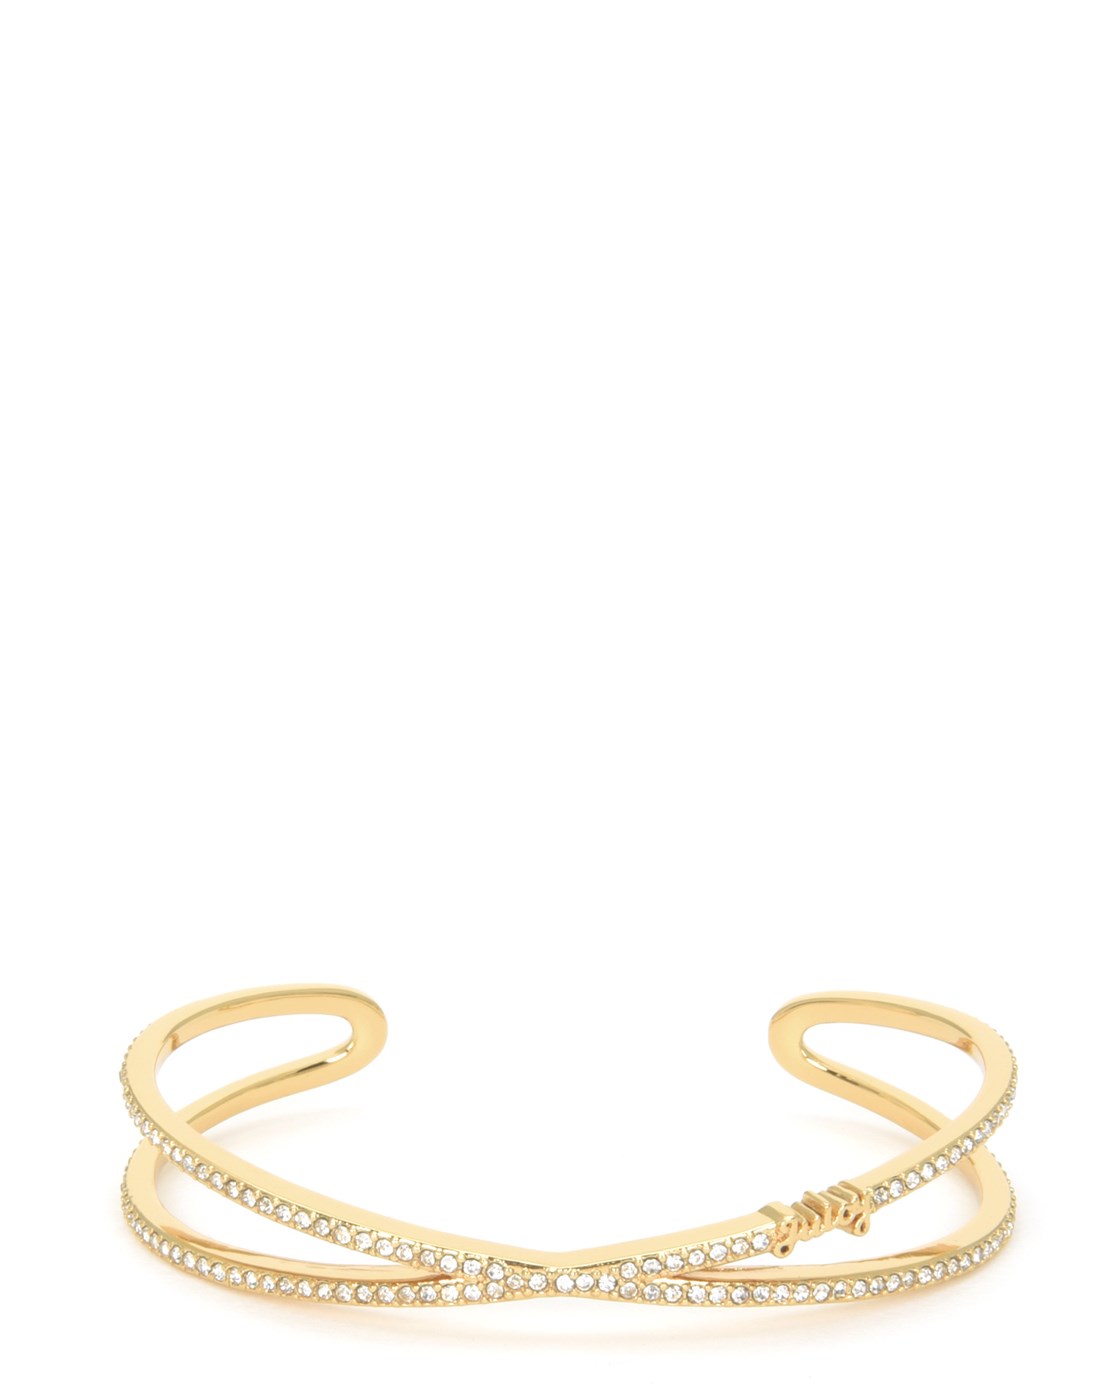 Juicy Couture PAVE INFINITY LUXE WISHES BRACELET